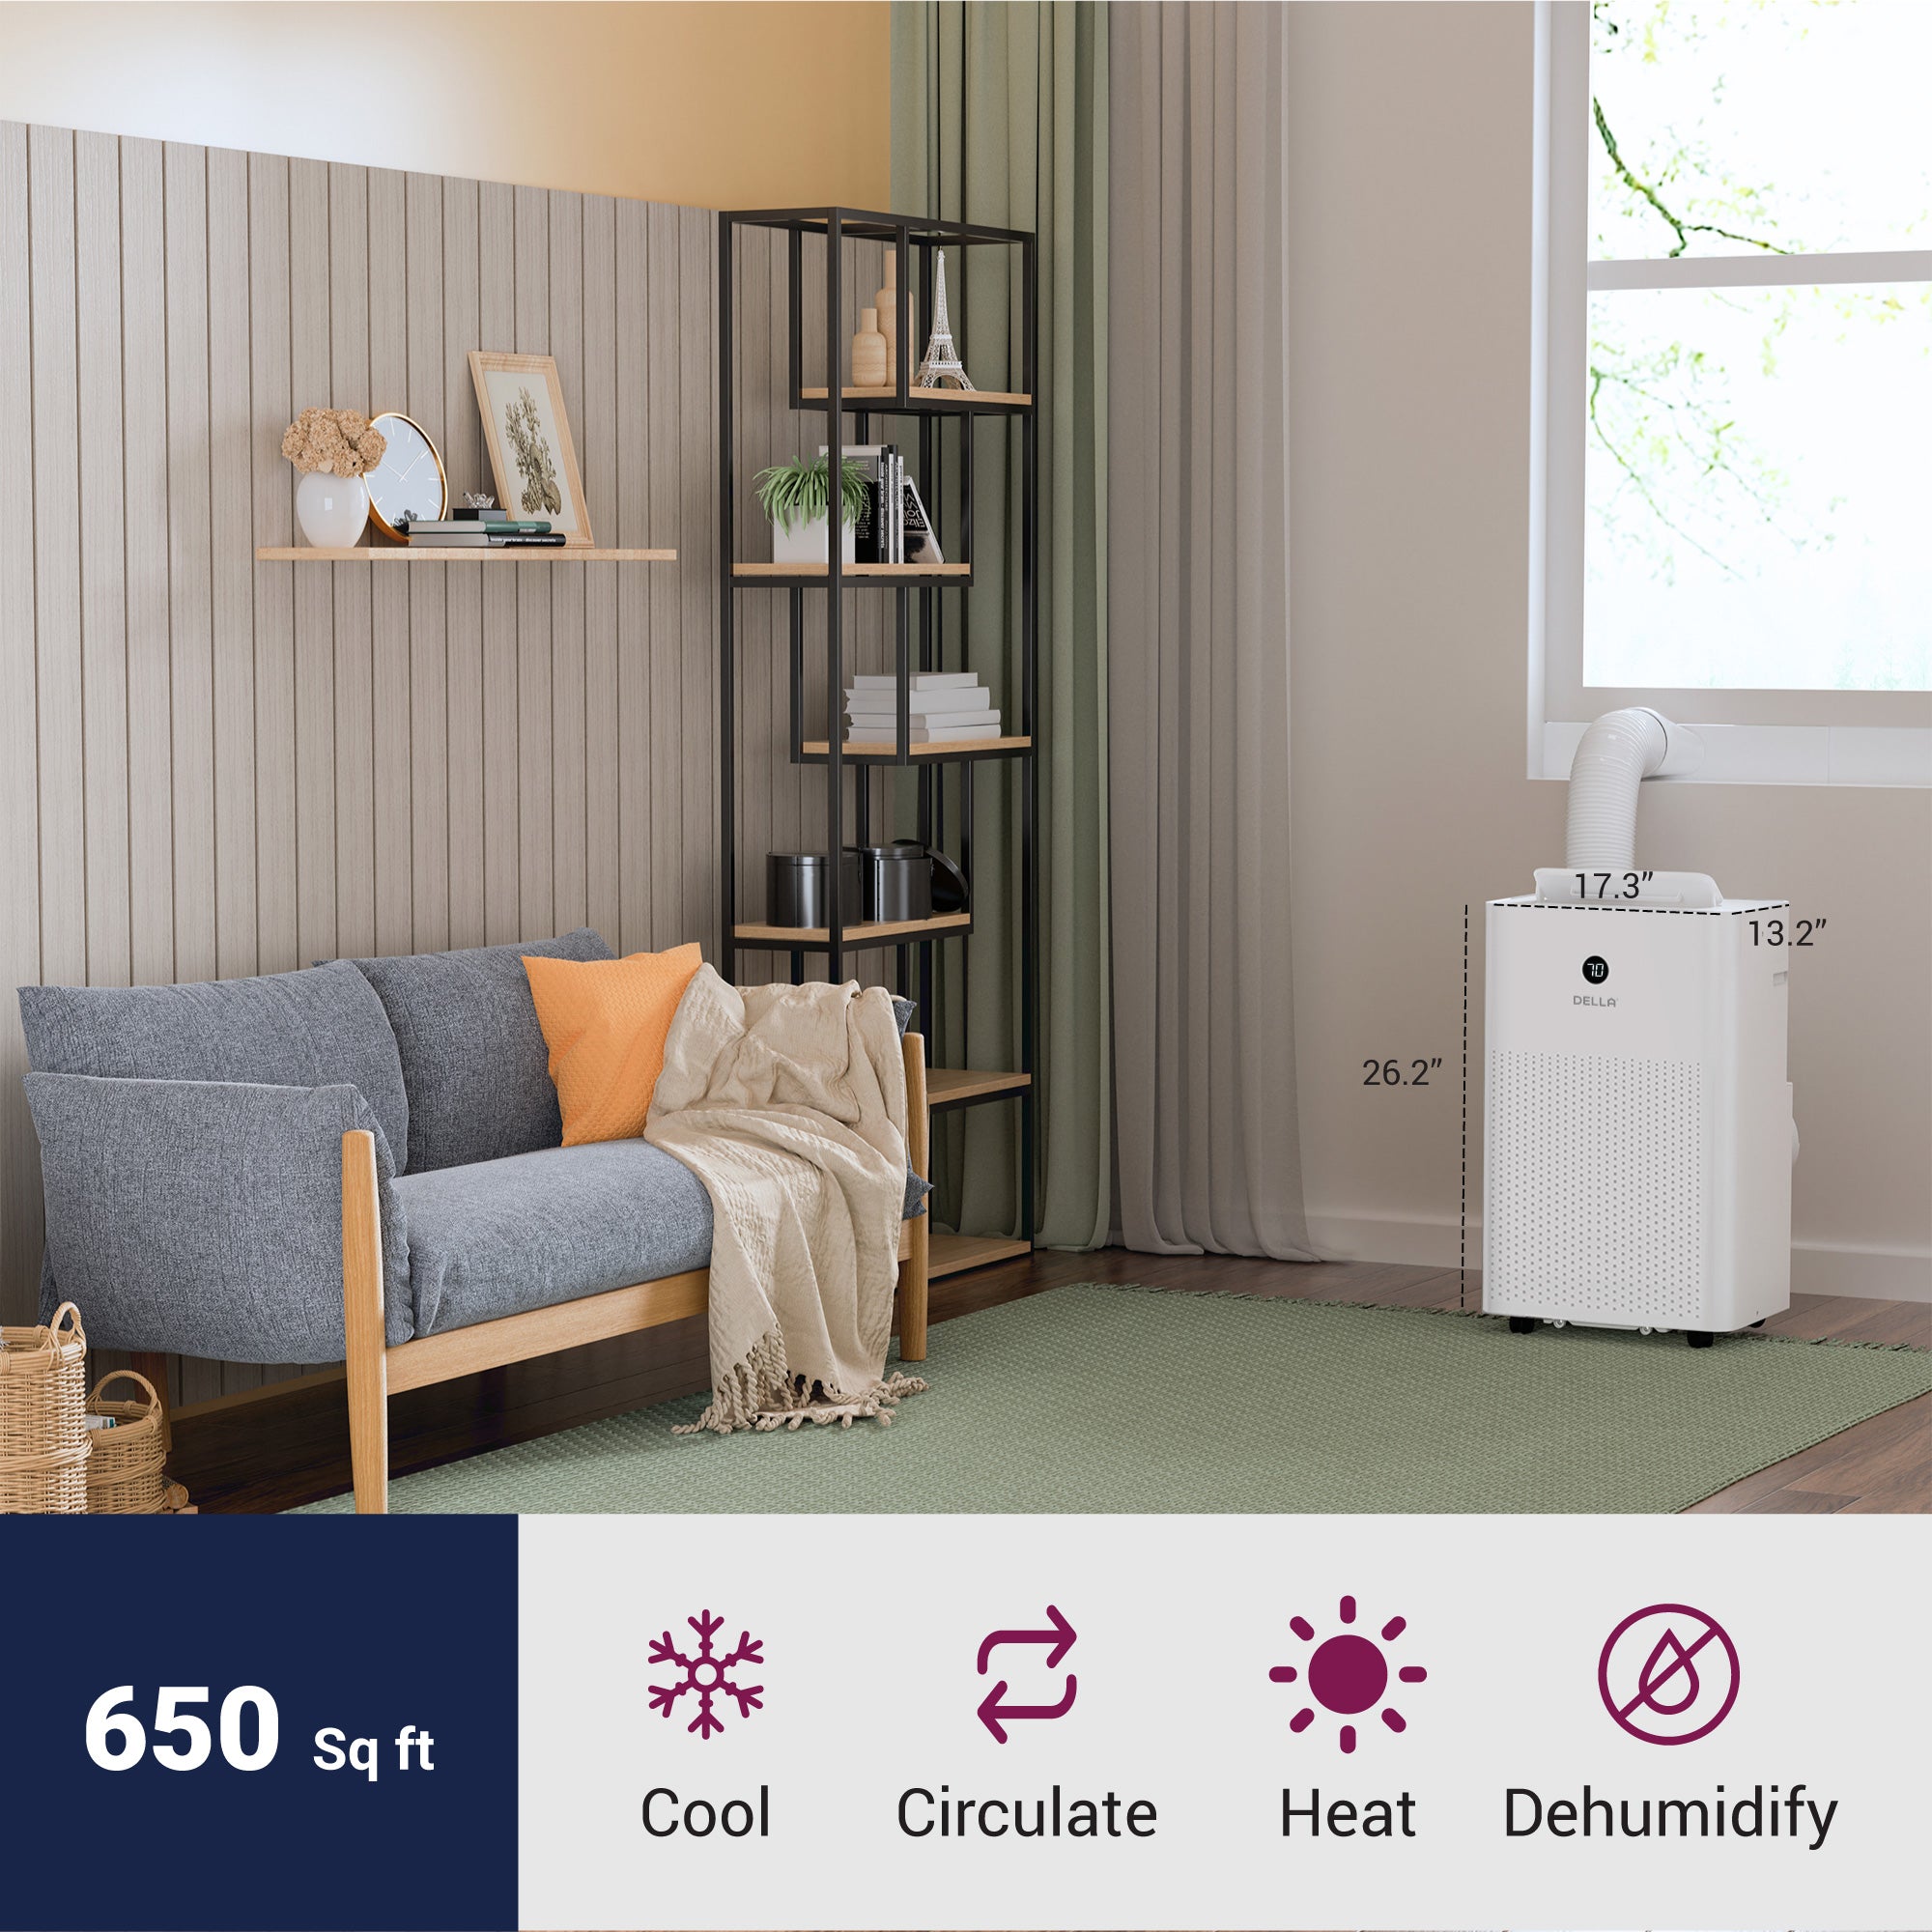 14,000 BTU Portable Air Conditioner with Heat Pump Cools Up To 650 Sq. Ft.